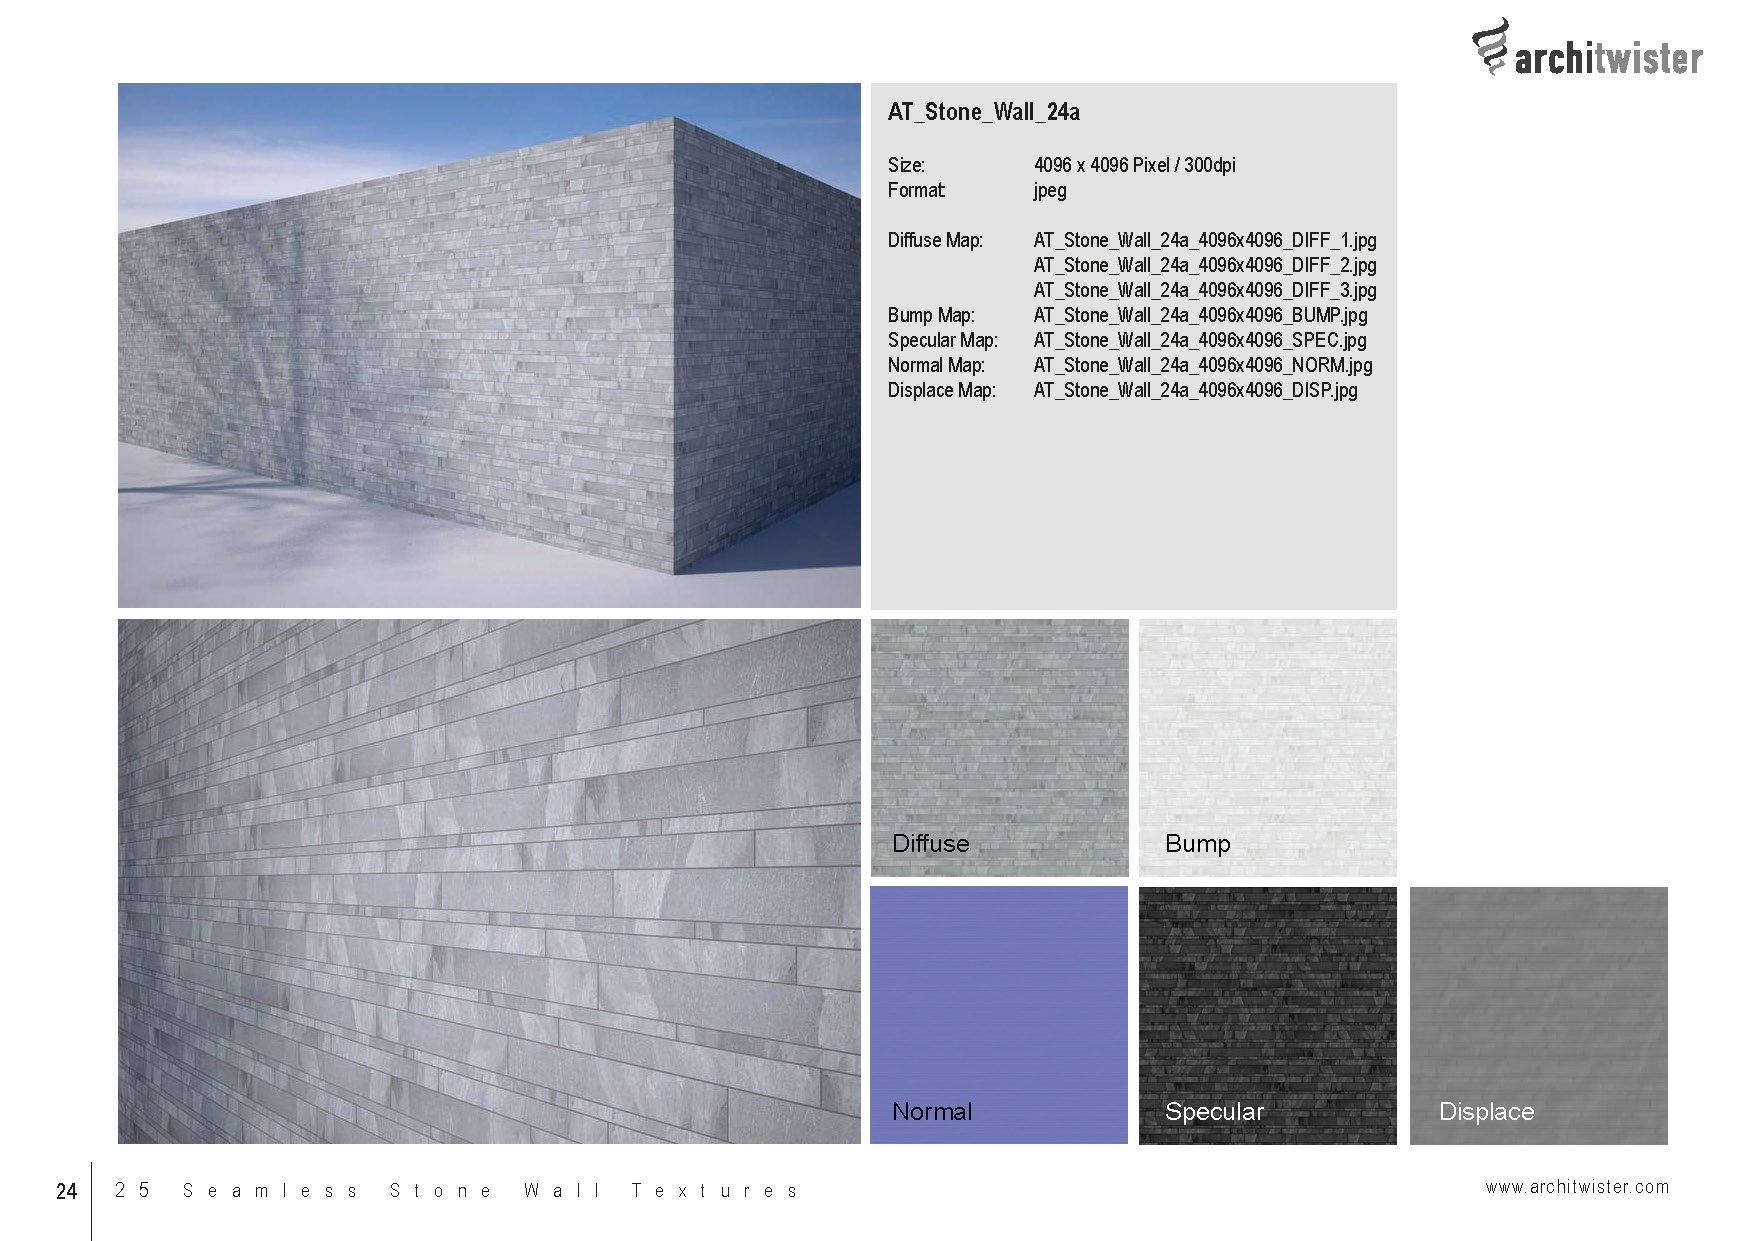 at stone wall textures catalog 01 seite 25 445